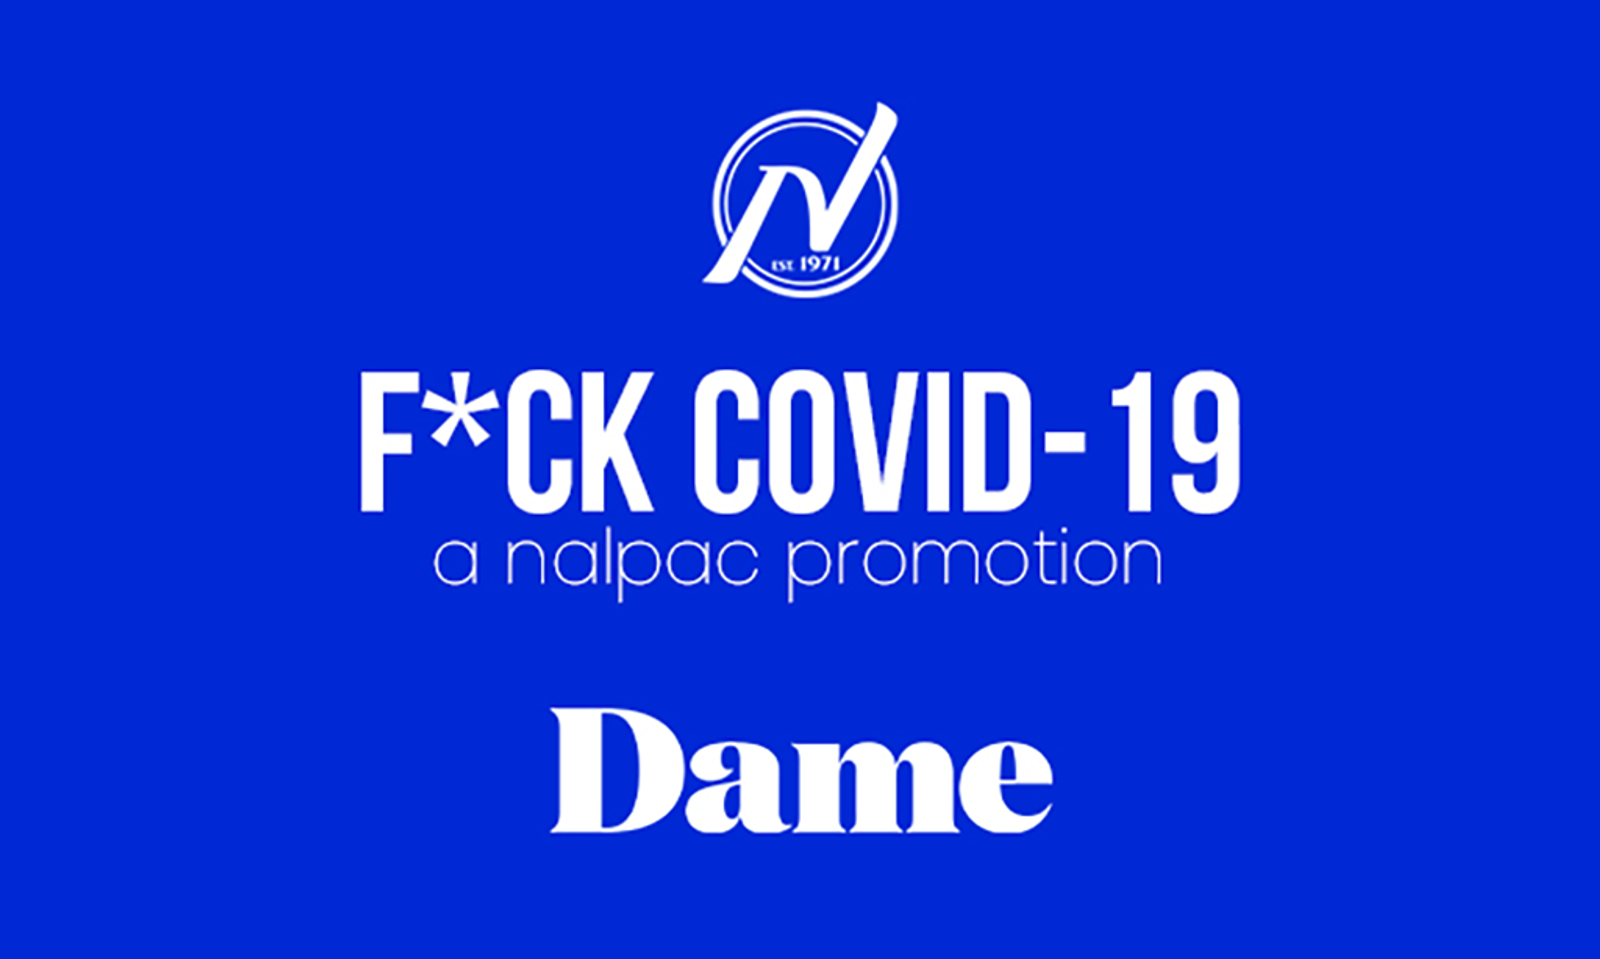 Nalpac's F*ck Covid19 Campaign Week 14 Features Dame Products